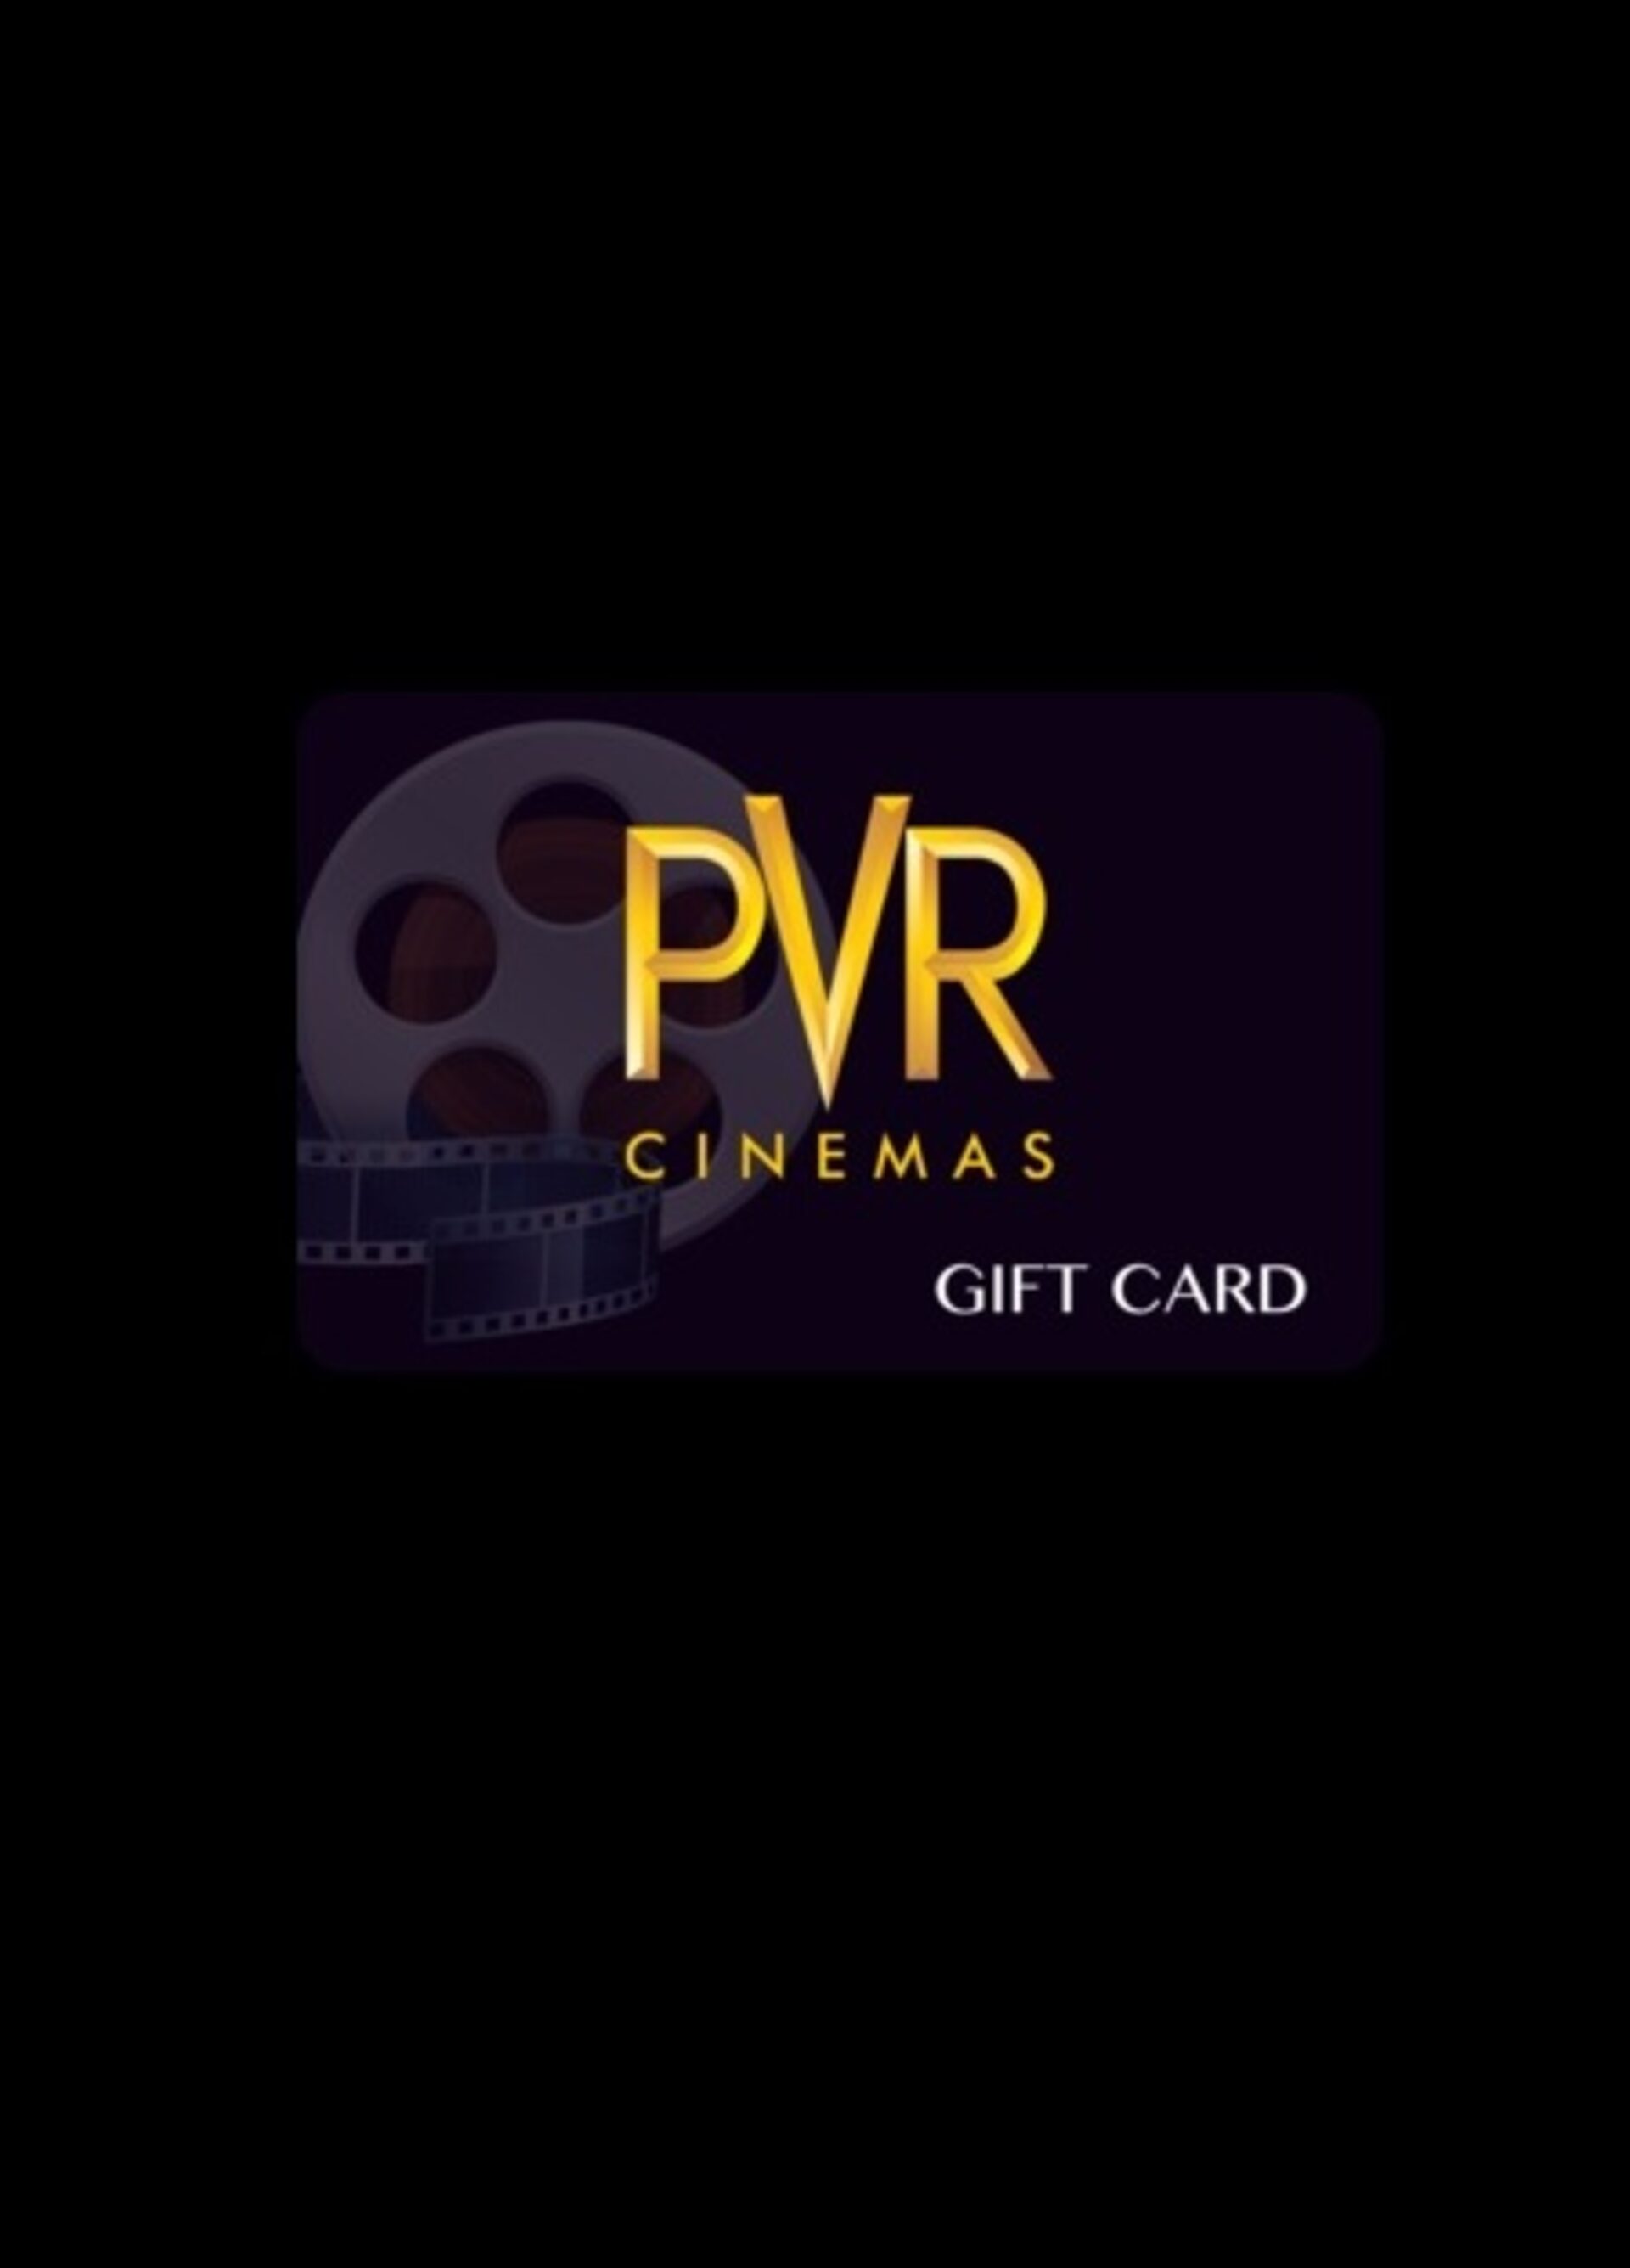 Buy Vox Cinemas gift cards with Bitcoin and Crypto - Cryptorefills